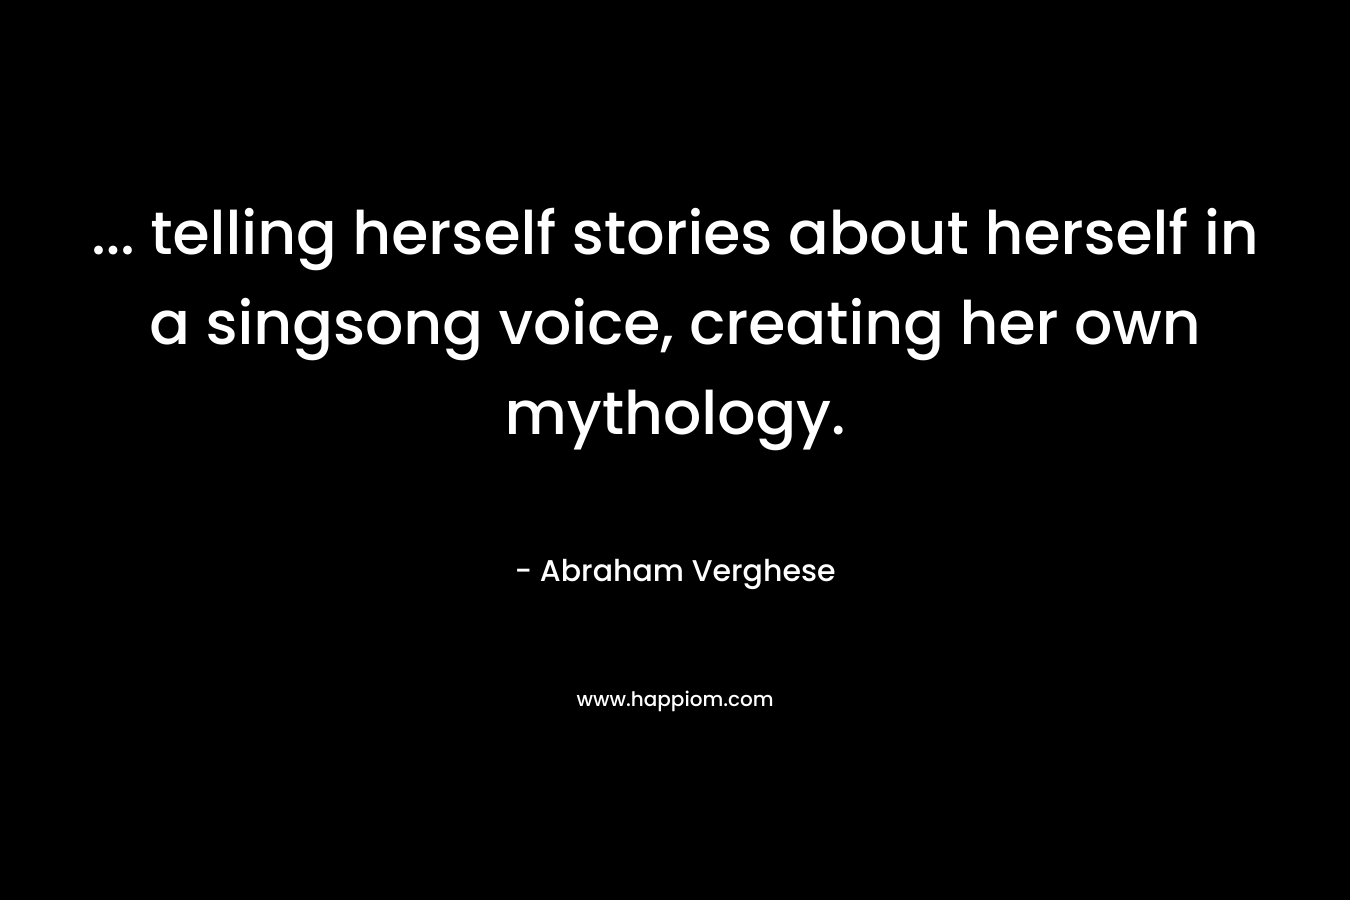 ... telling herself stories about herself in a singsong voice, creating her own mythology.